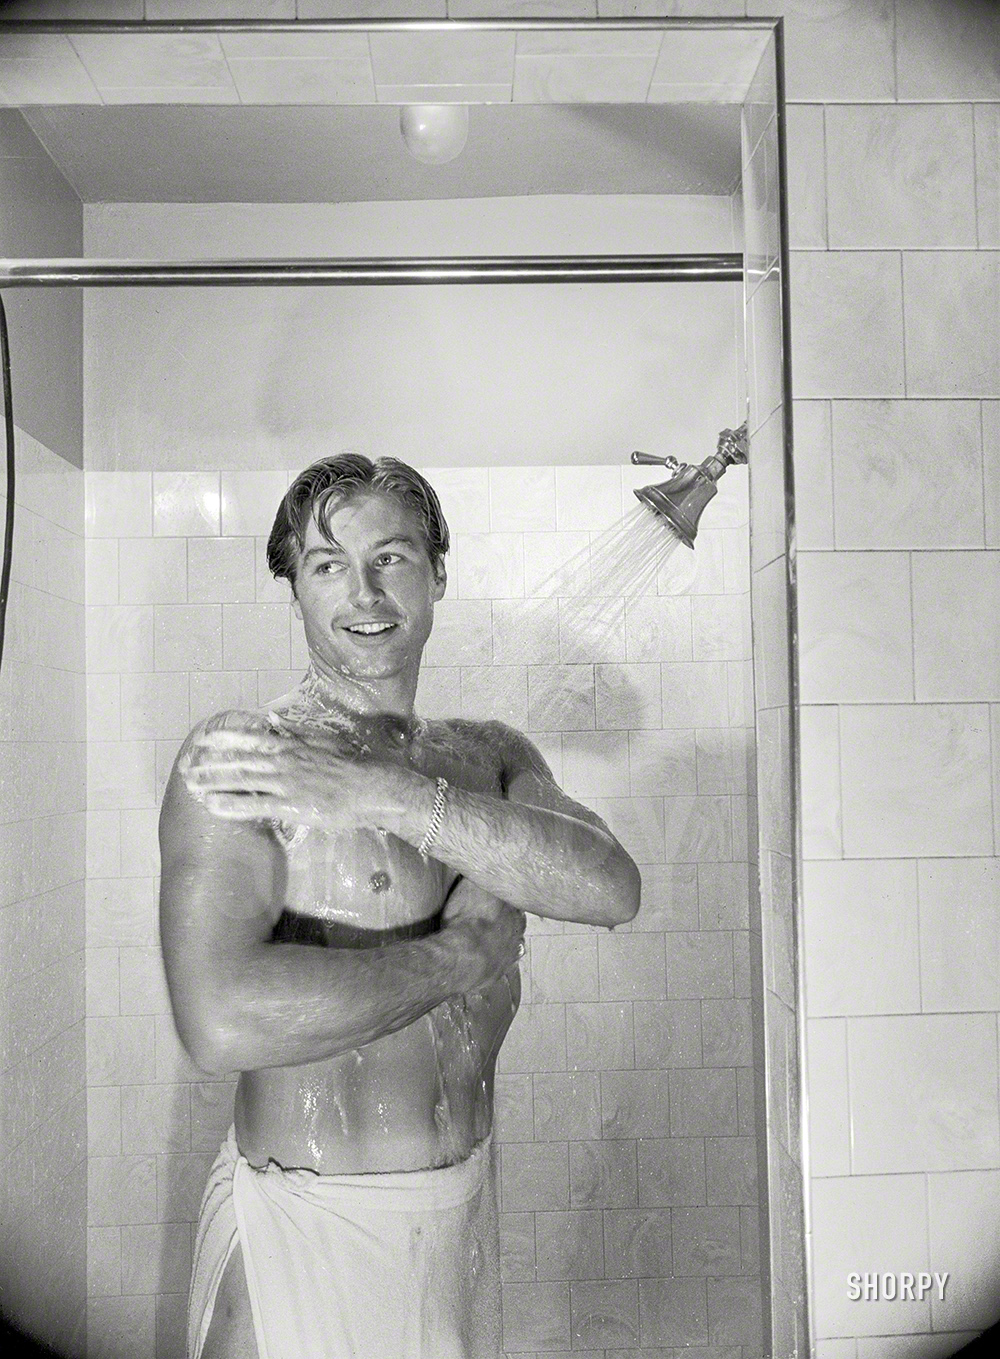 Los Angeles, 1948. "Shower ends Lex's non-acting day that includes lifting weights, punching bag and many other exercises." From photos by Maurice Terrell for the Look magazine assignment "Lex Barker: Princeton-Bred Tarzan." View full size.